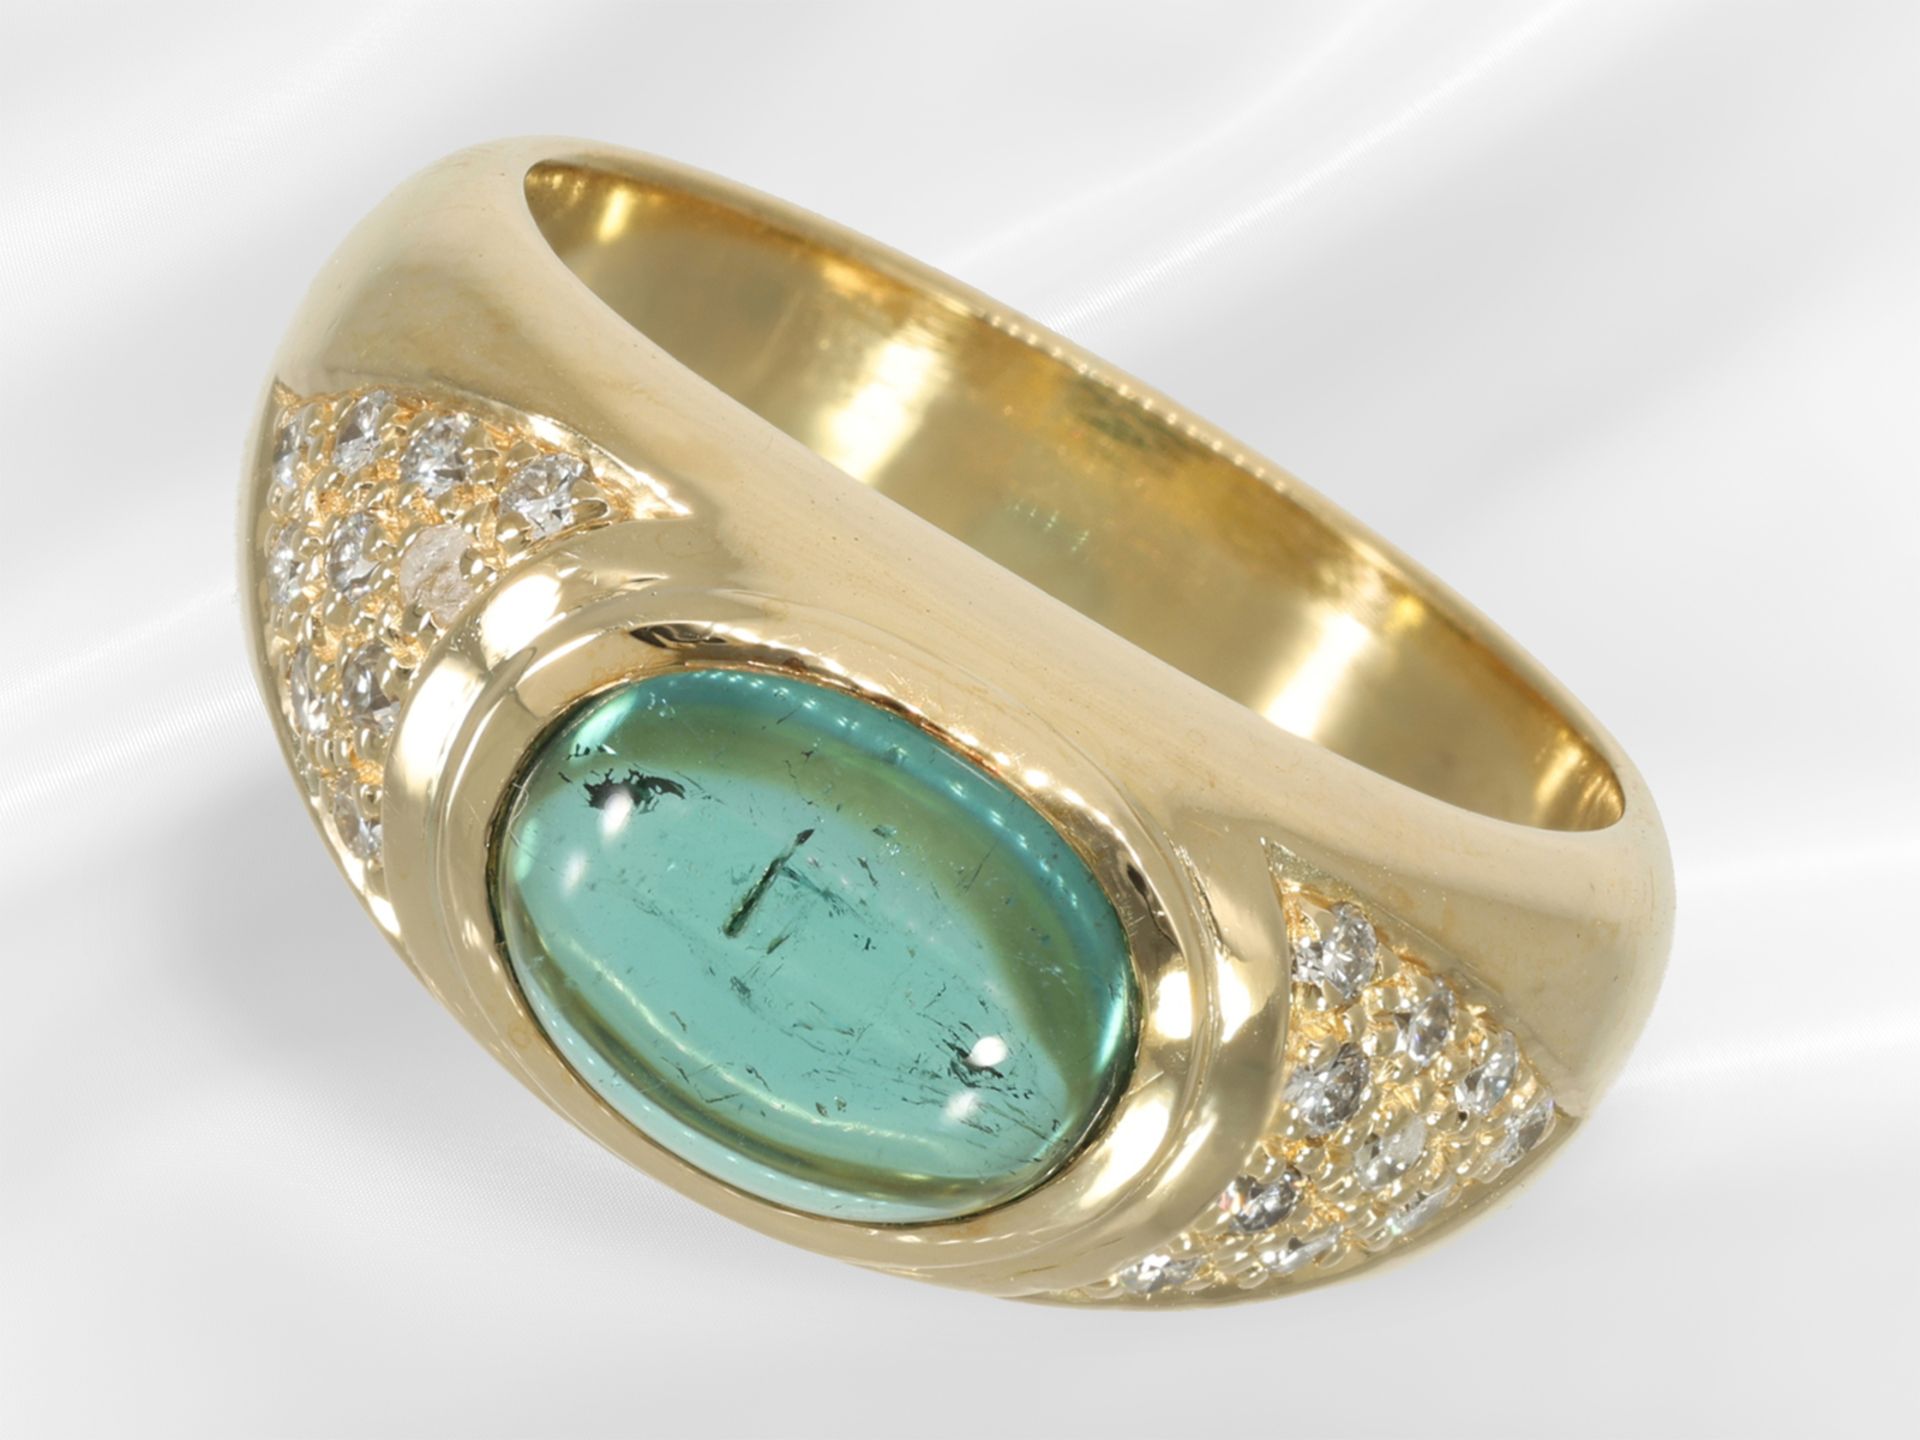 Ring: heavy gold jewellery ring set with brilliant-cut diamonds and tourmaline